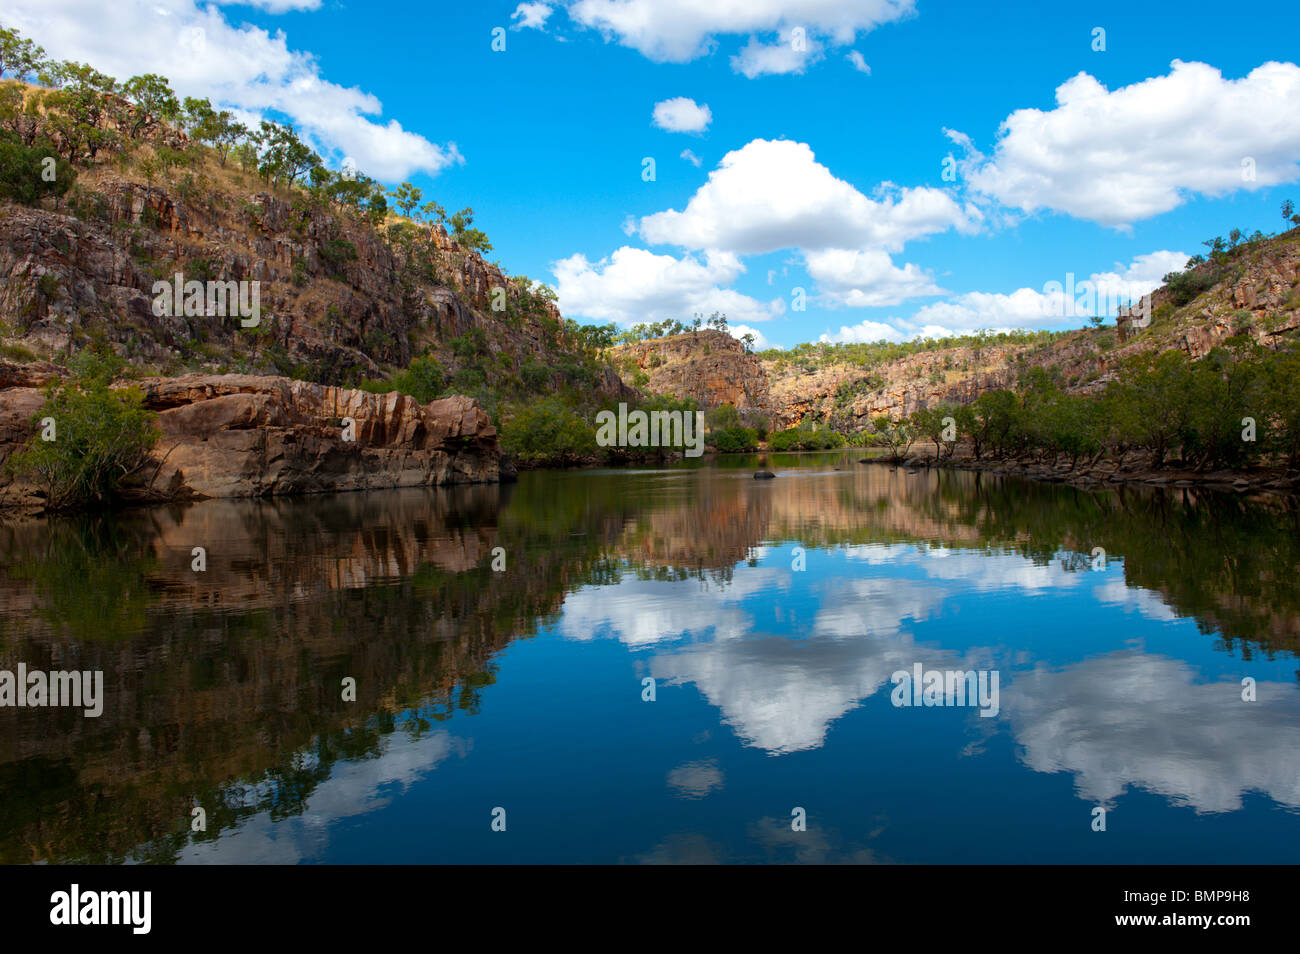 Katherine Gorge National Park now known as Nitmiluk National Park is a popular tourist attraction in the Northern Territory. Stock Photo